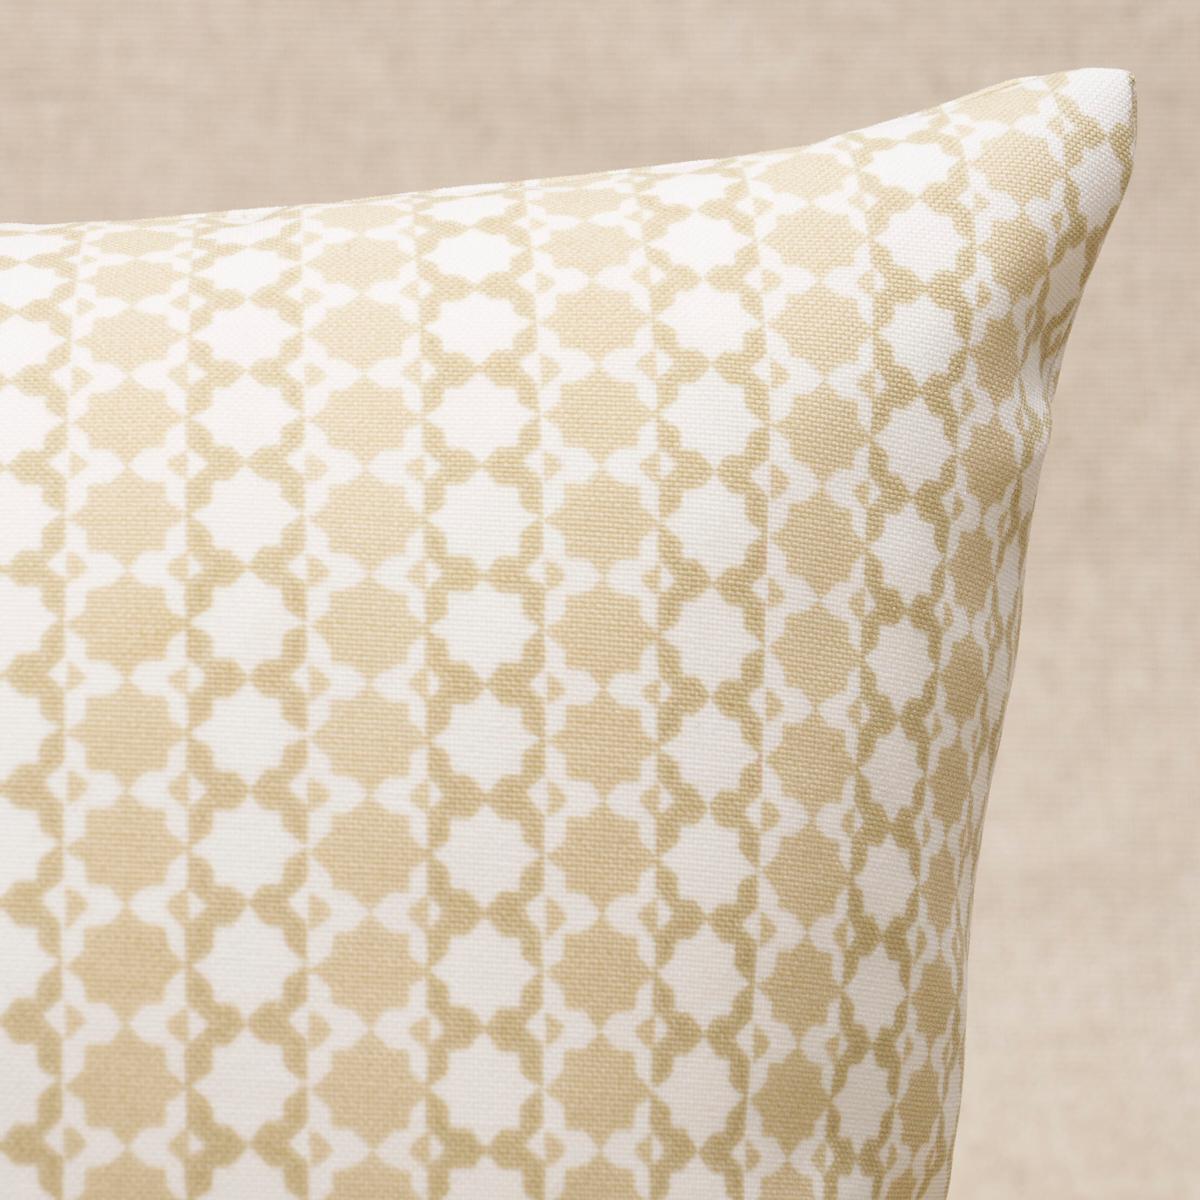 This pillow features Posy Indoor/Outdoor by Mark D. Sikeswith a knife edge finish. Inspired by traditional Moroccan tiles, Posy Indoor/Outdoor in neutral by Mark D. Sikes is a stylish high-performance fabric that can stand up to the elements. Pillow